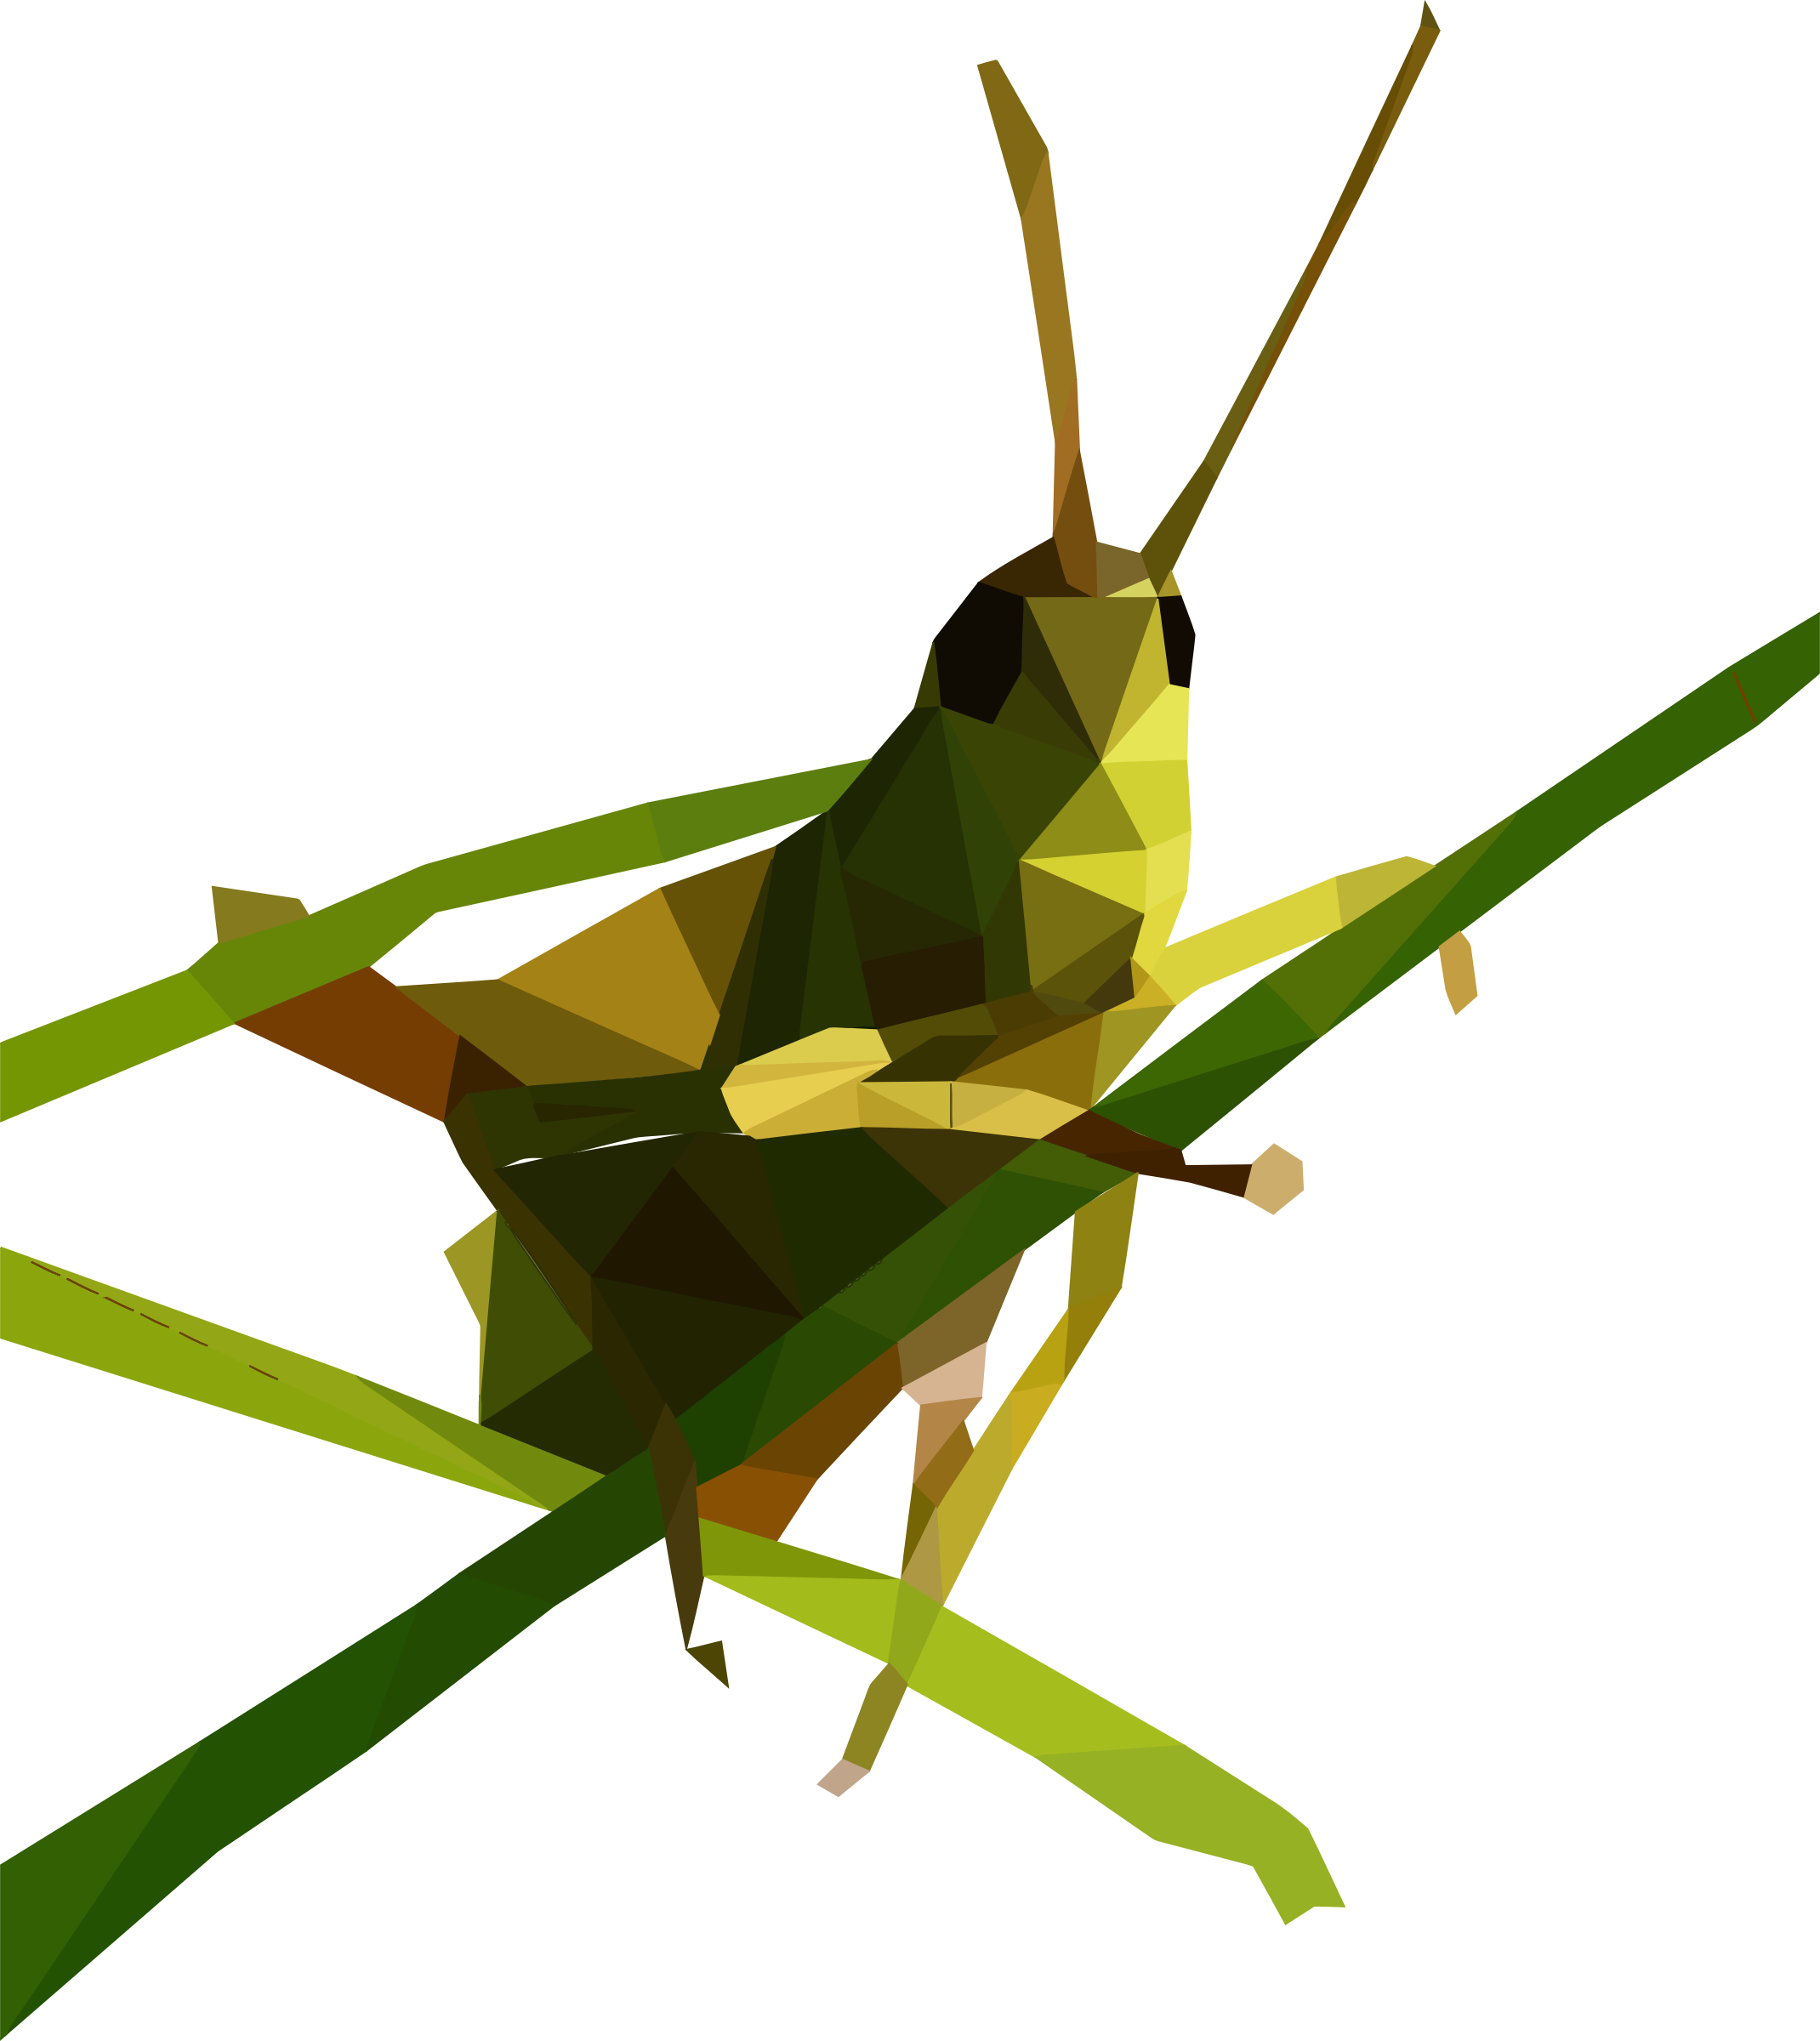 insects clipart grashopper